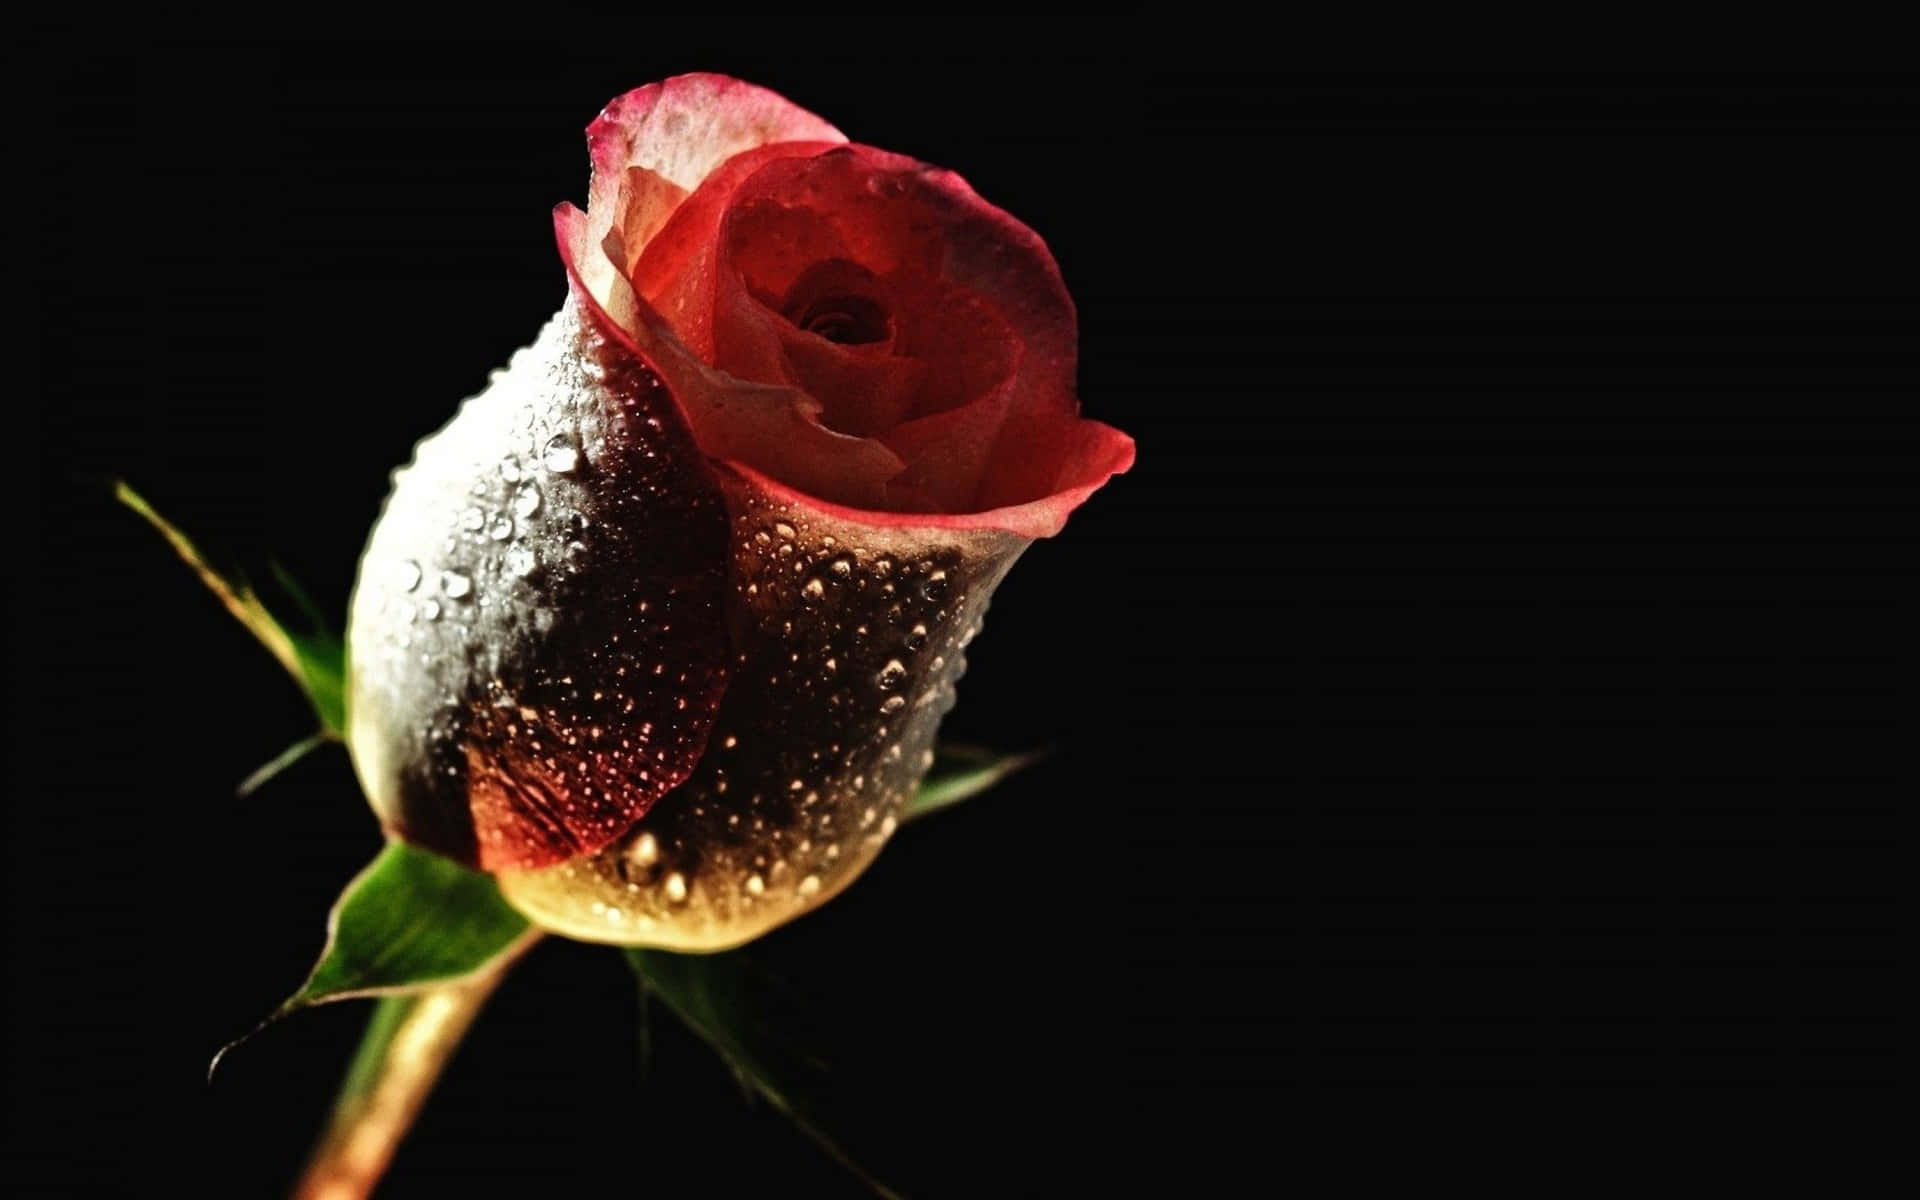 A Rose With Water Drops On It Is Shown Against A Black Background